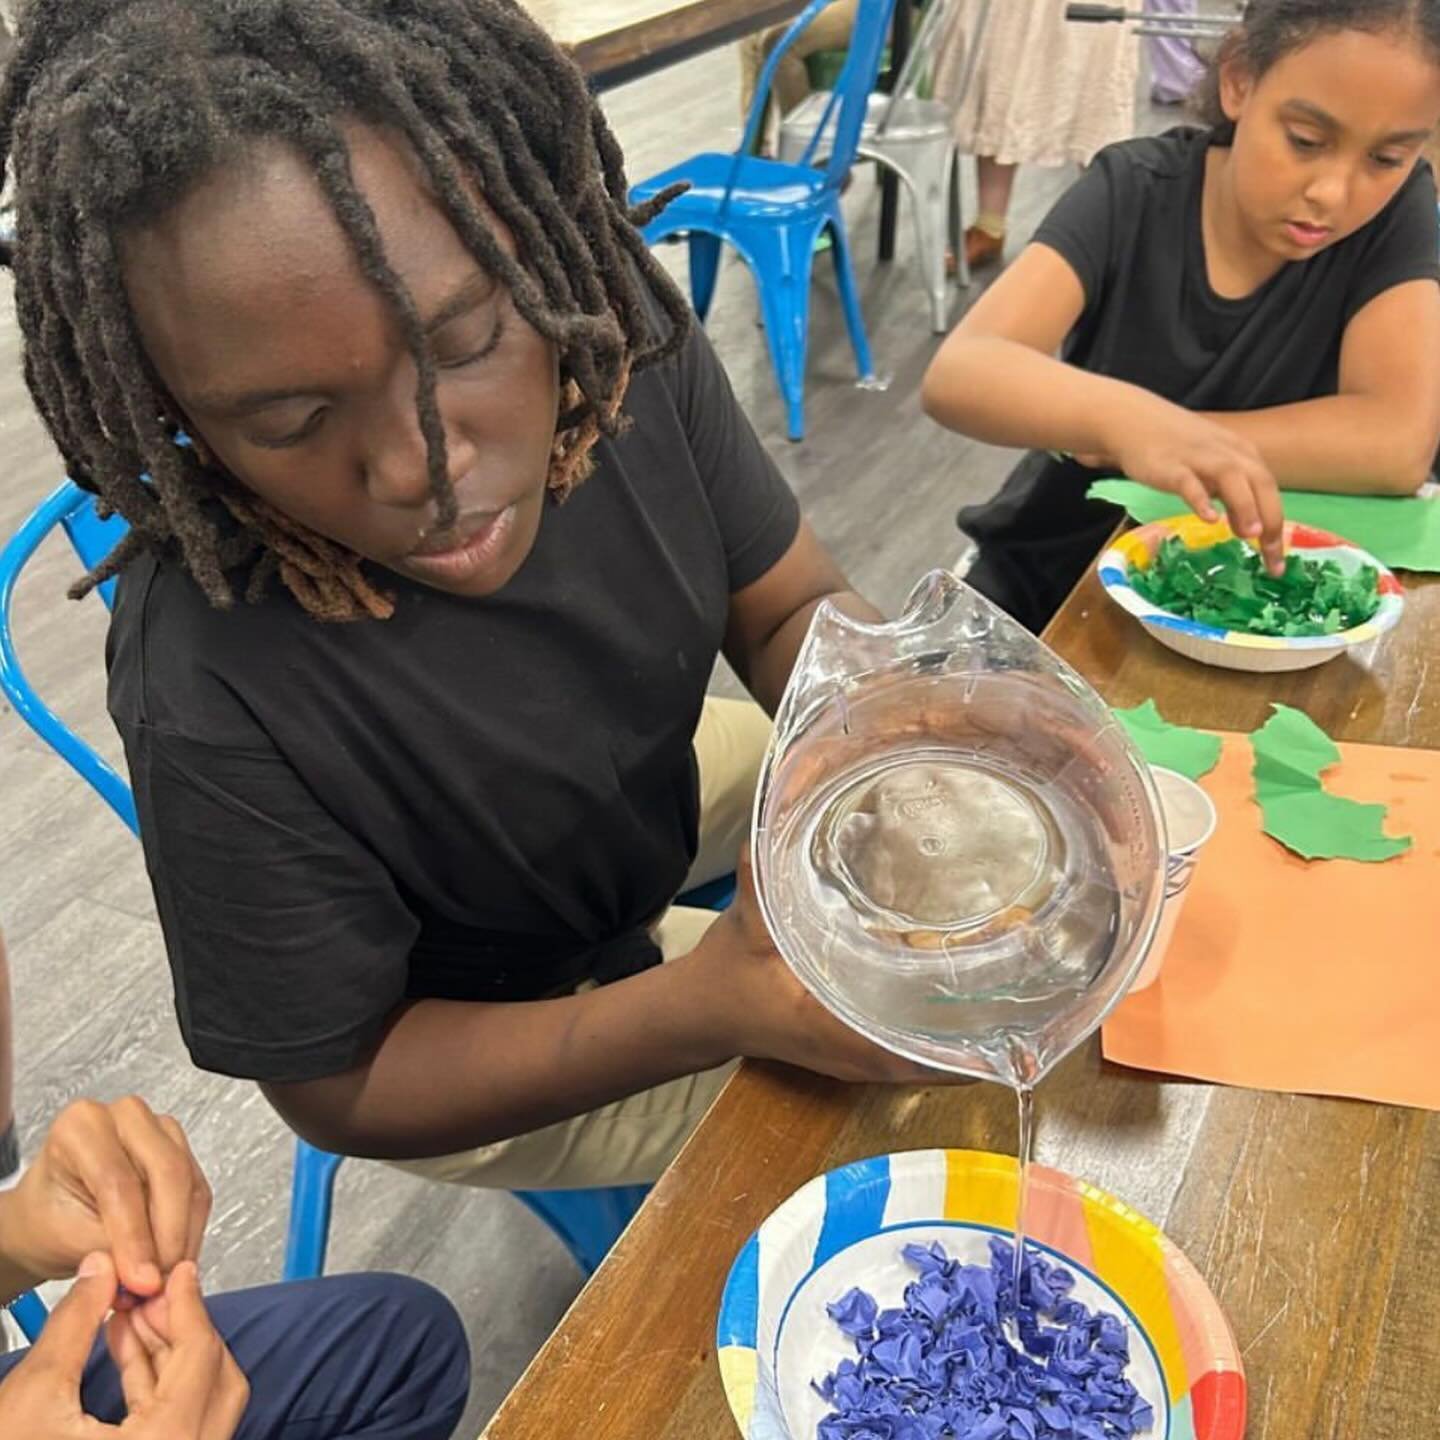 Sprouts Afterschool Academy Tuesday-Thursday 3-6pm at @thefood.project 424 S. Pulaski St with our youth leaders and partners @sowhatelsehelps @therapeutic_wellness_services @royallty__events